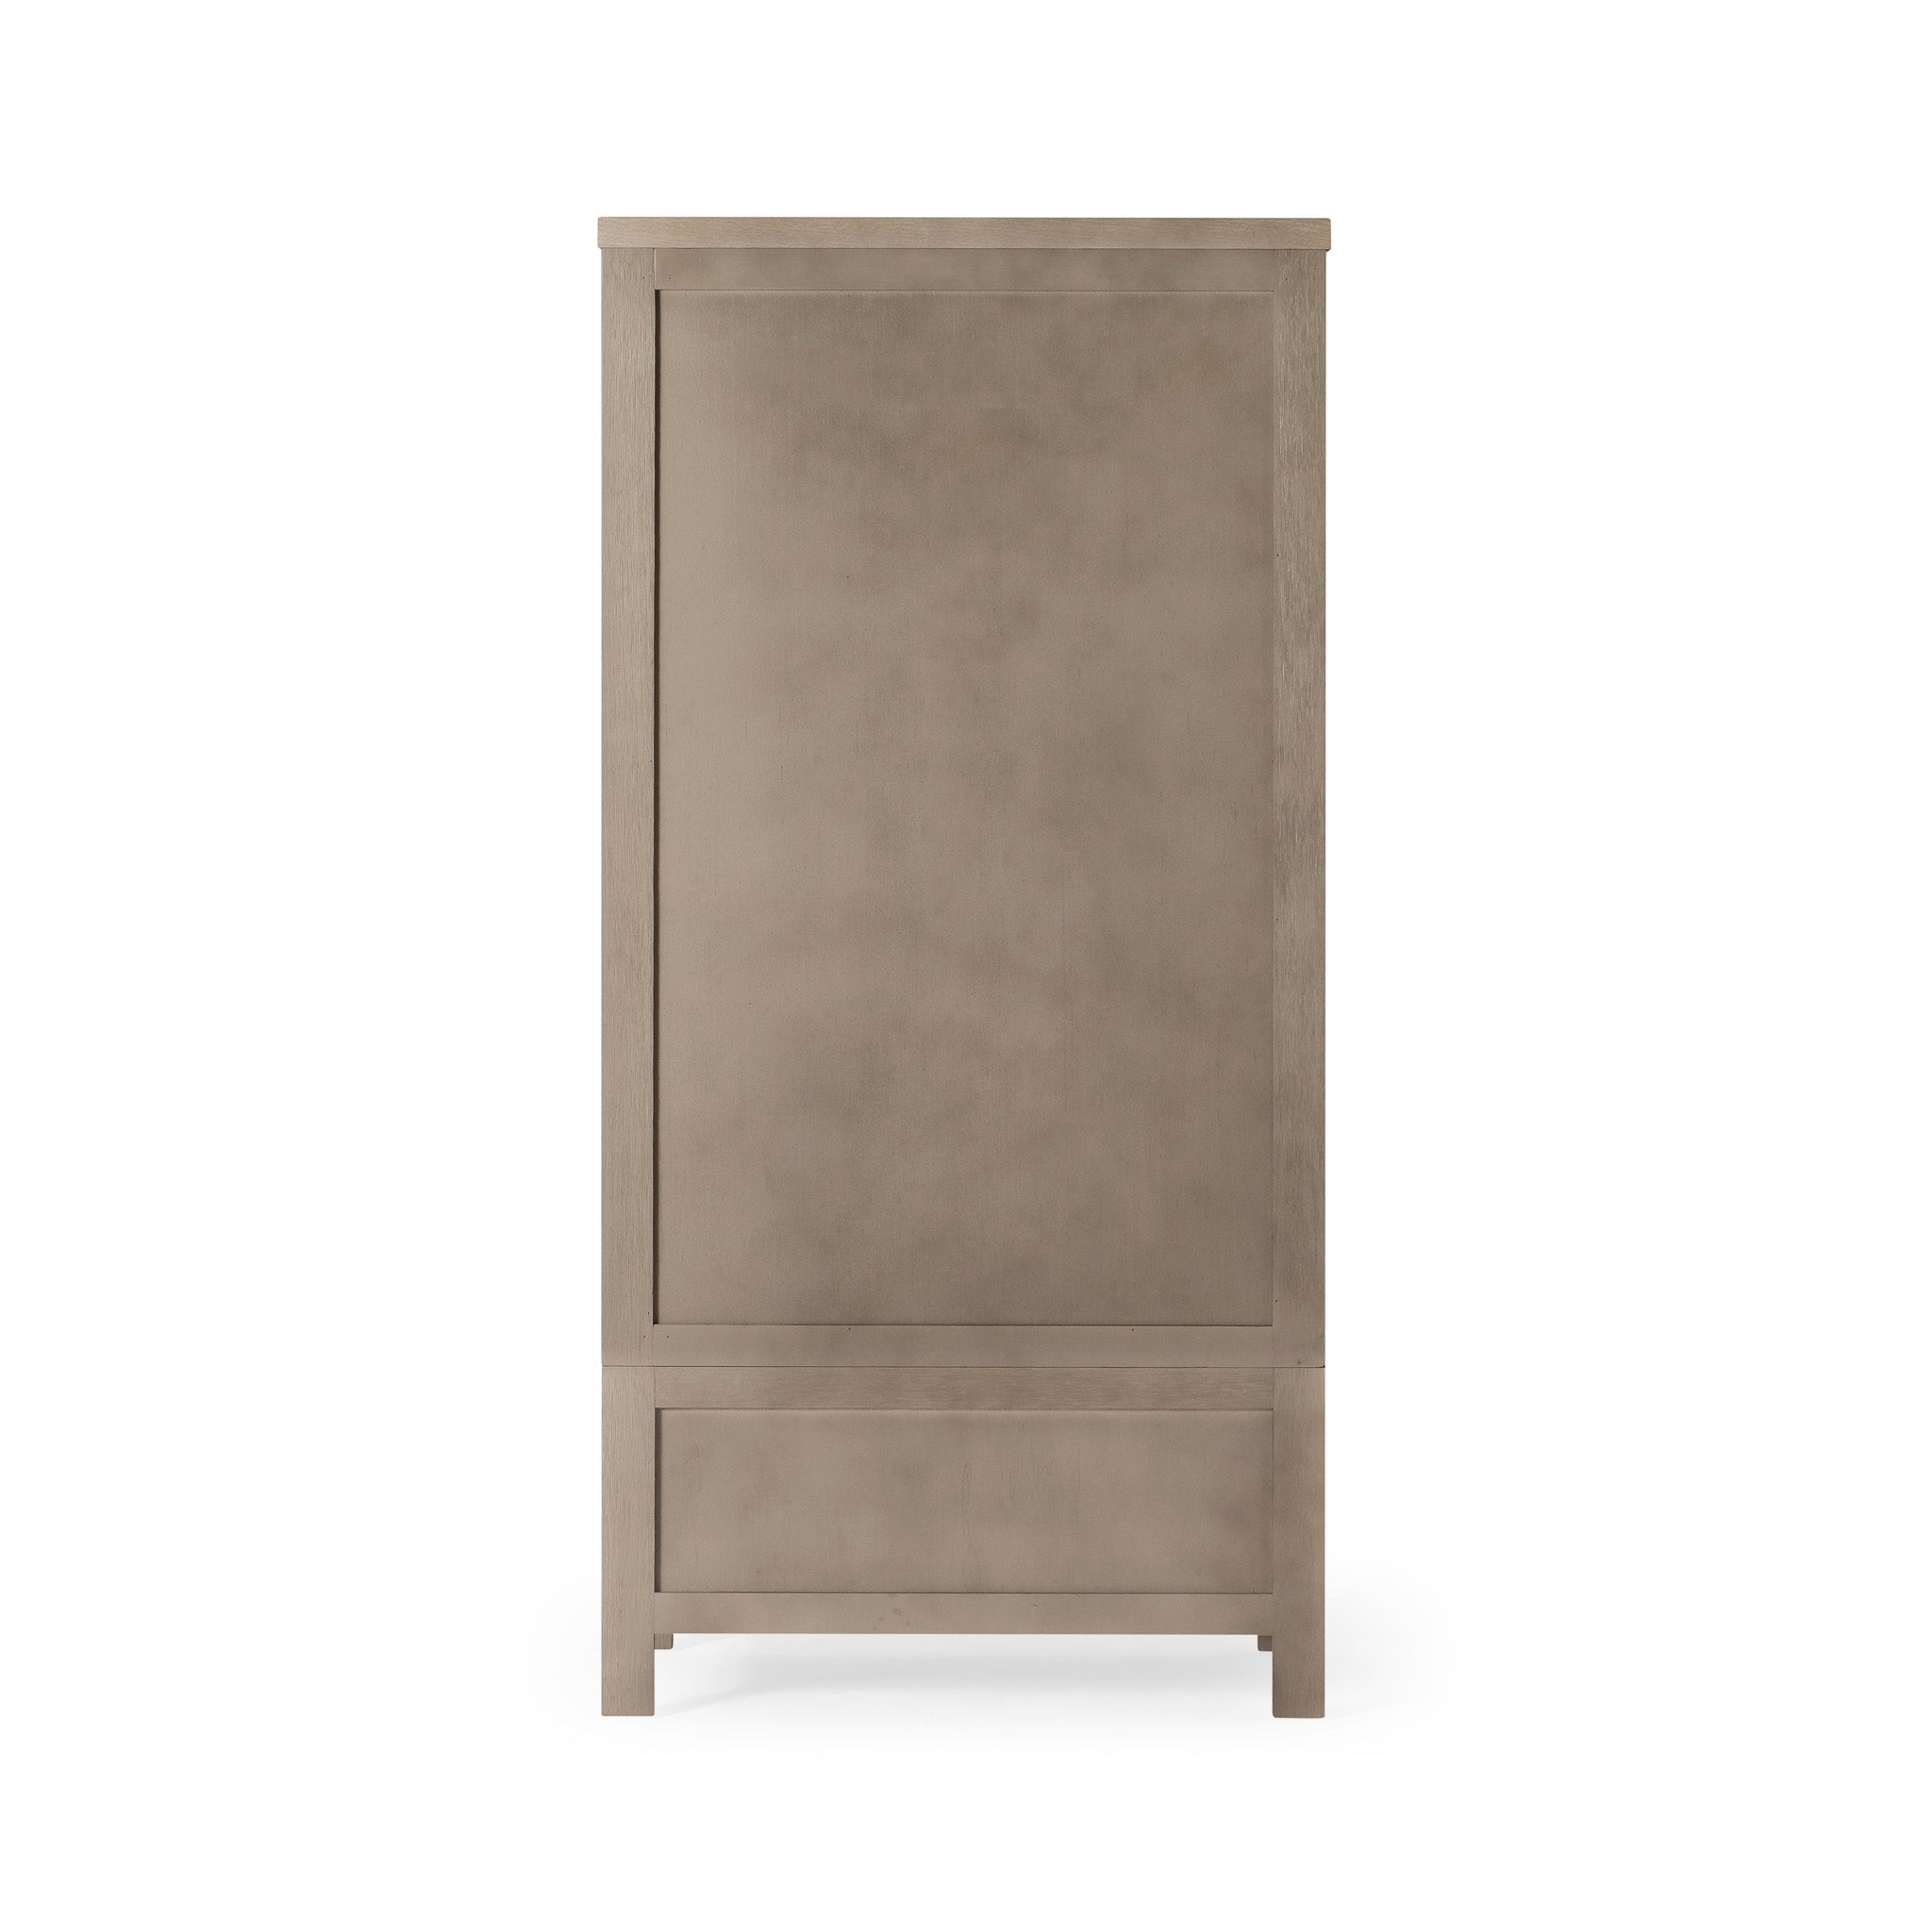 Vaughn Organic Wooden Cabinet in Weathered Grey Finish in Cabinets by Maven Lane